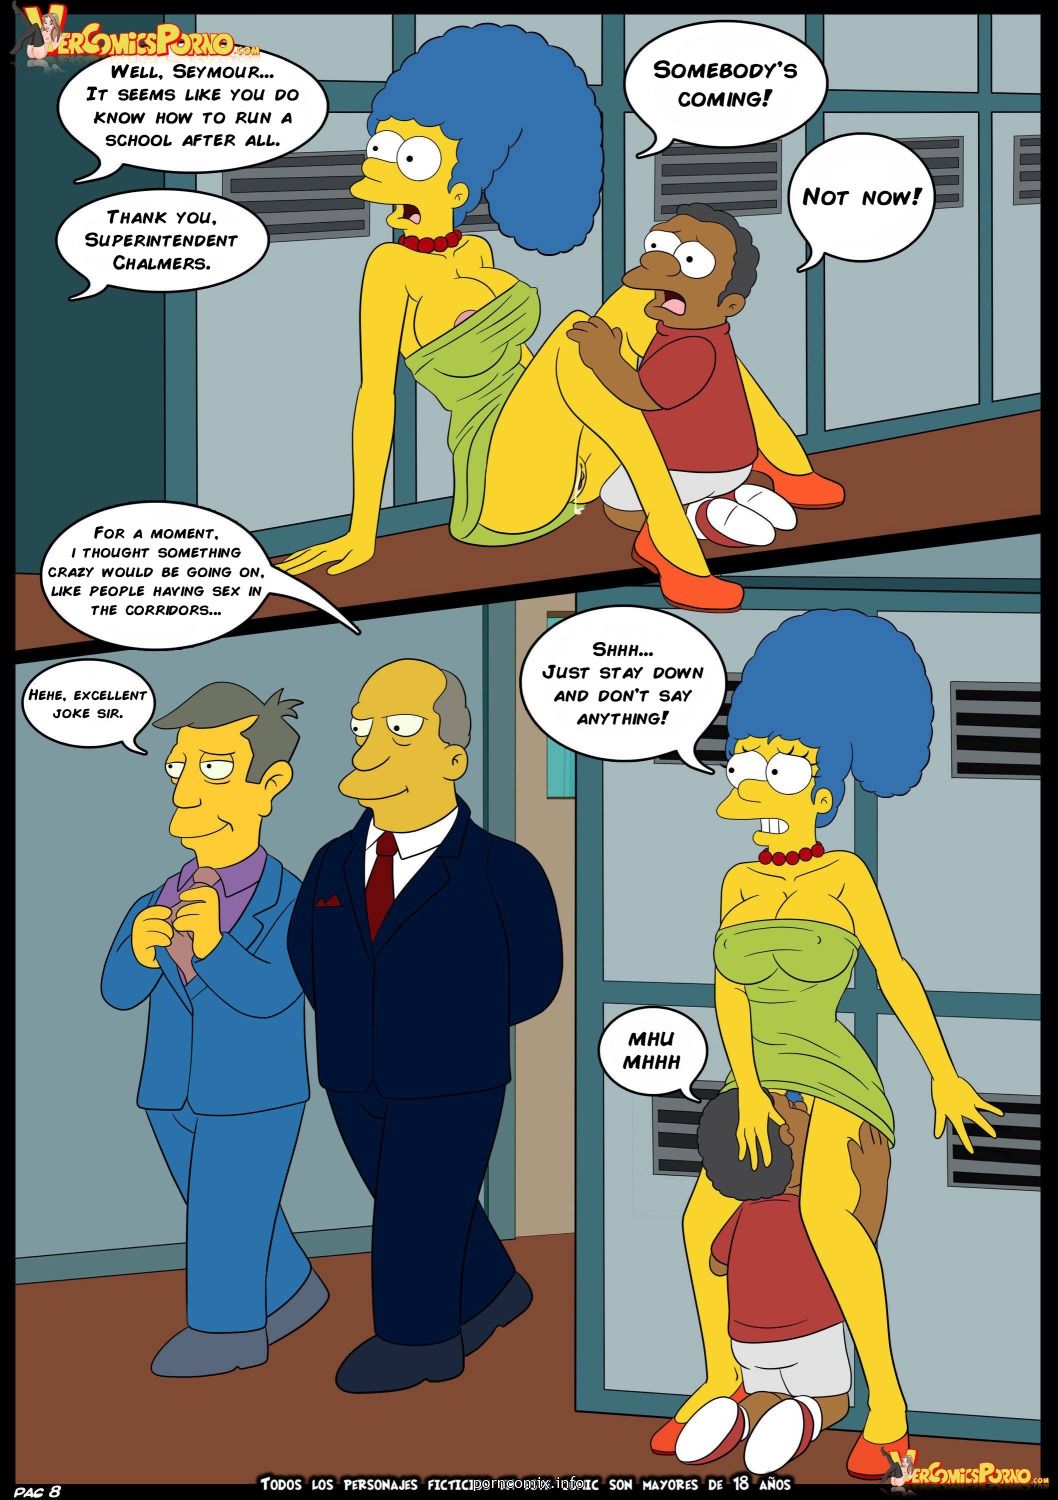 [CROC] The Simpsons Love for Bully (English) page 9